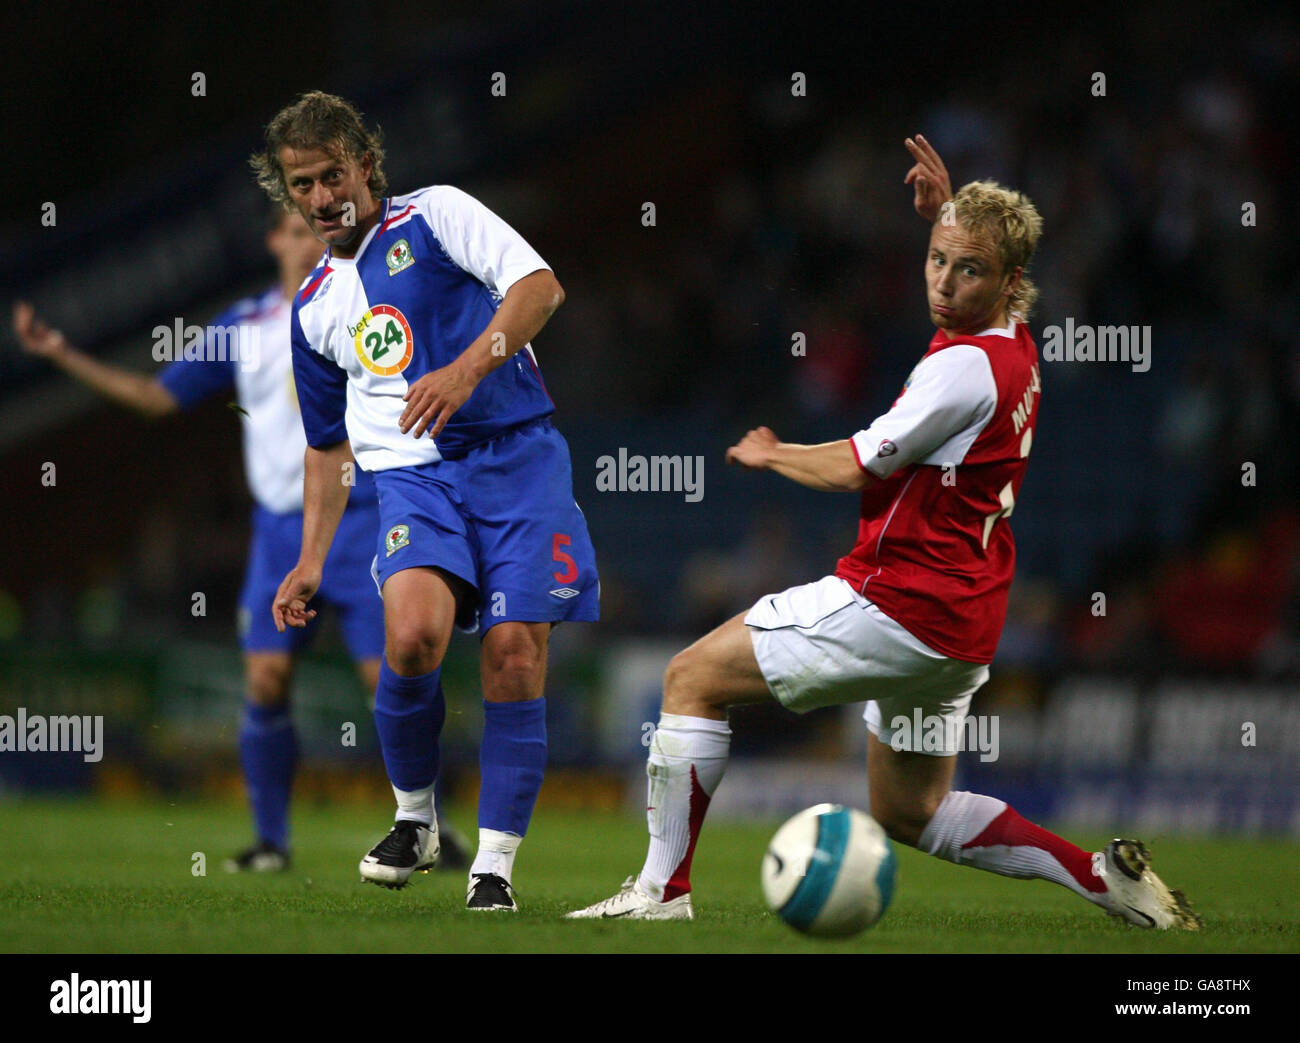 Blackburn Rovers' Tugay Kerimoglu passes the ball past Mypa 47's Toni Huttunen during the UEFA Cup Second Qualifying Round Second Leg match at Ewood Park, Blackburn. Stock Photo